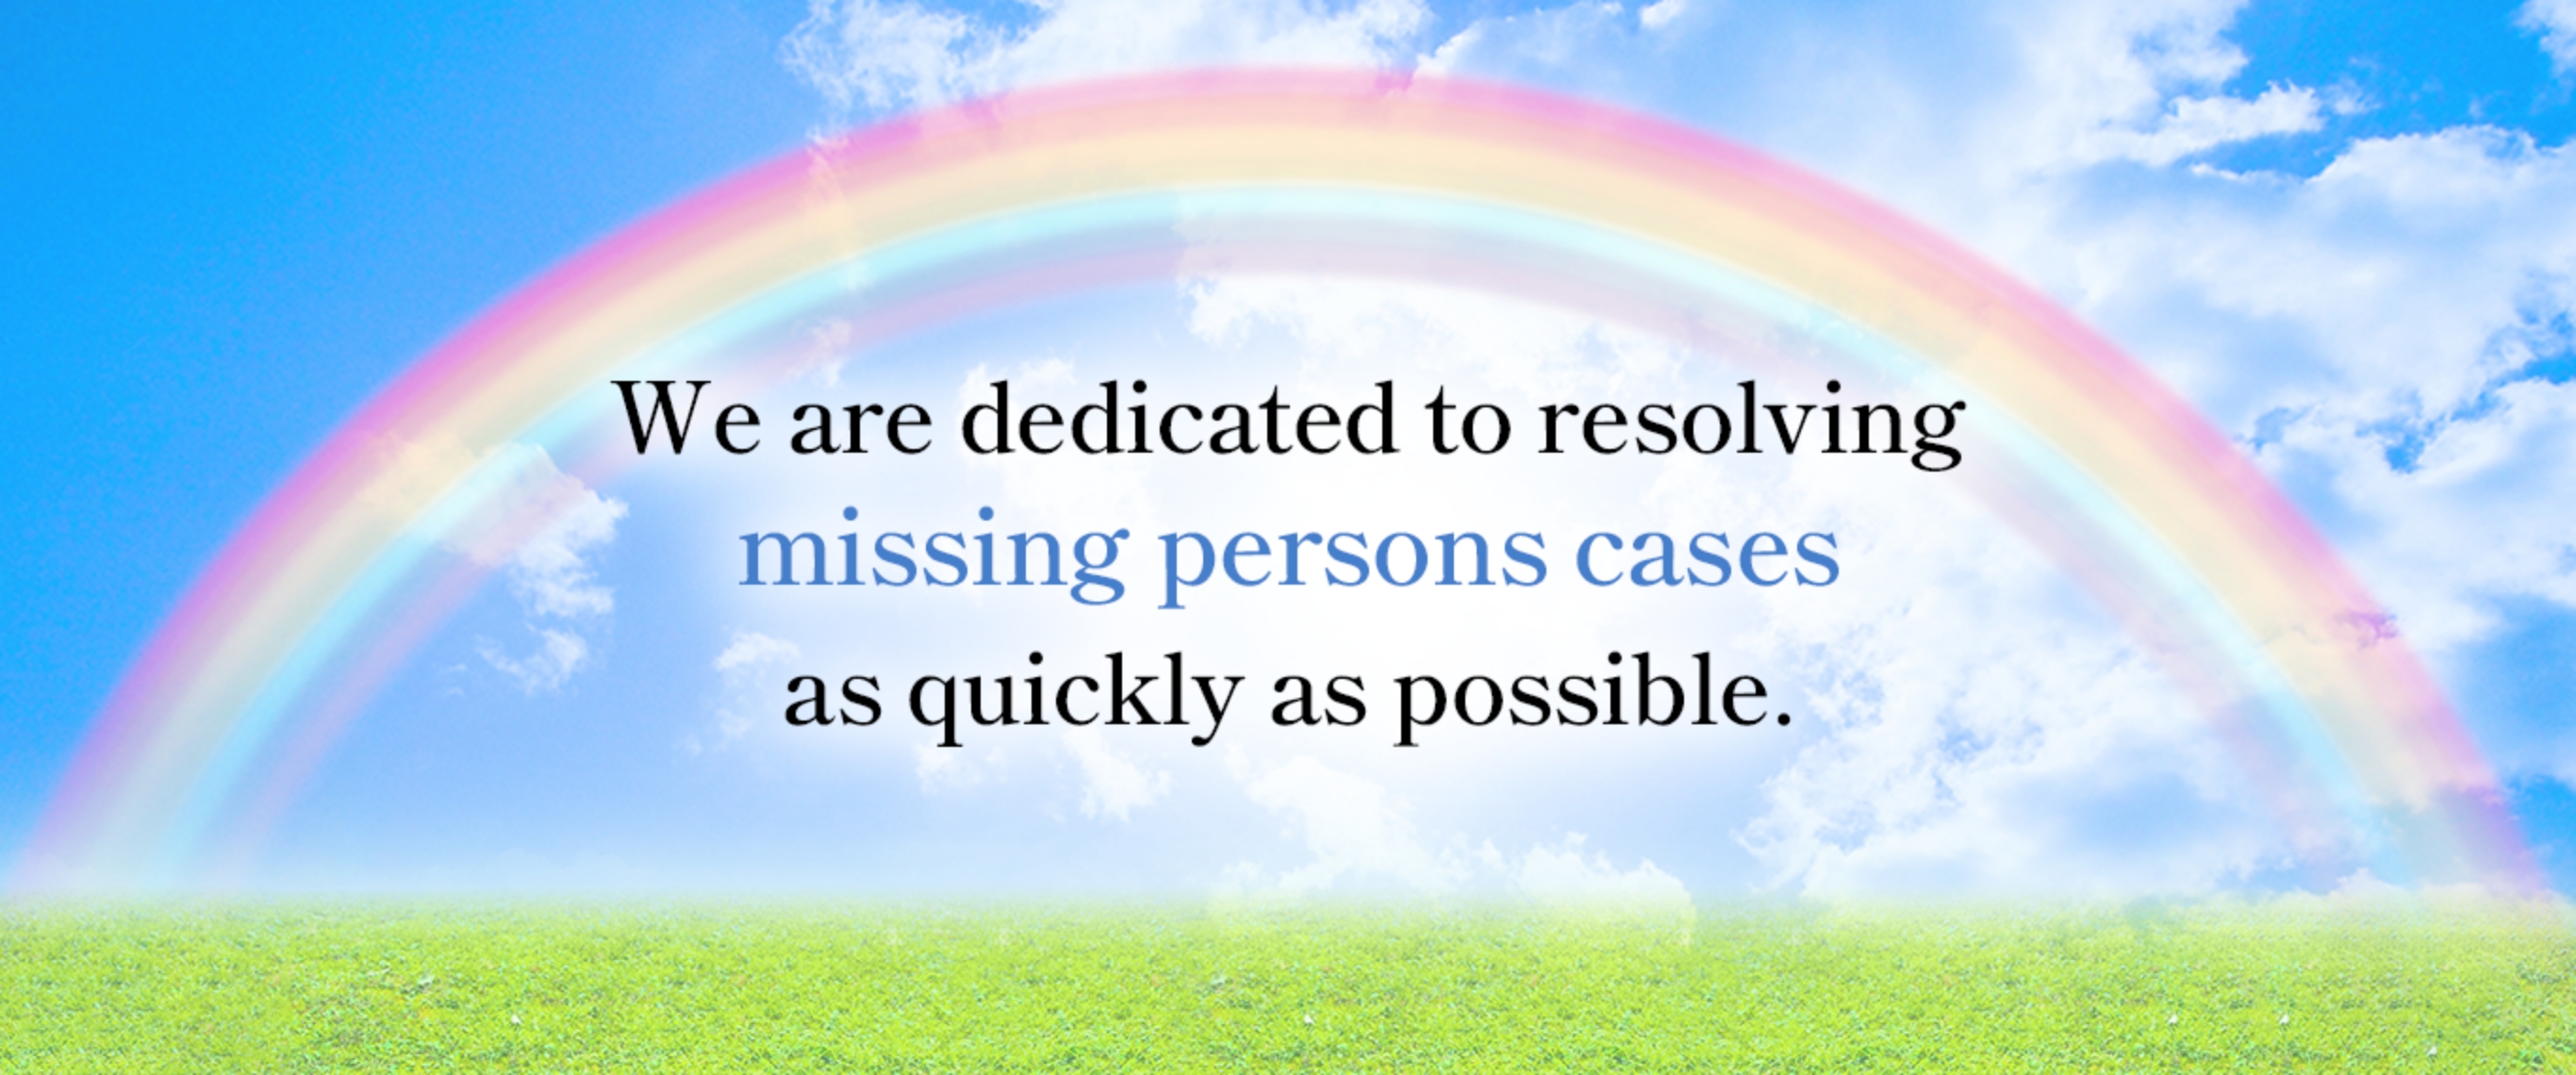 We are dedicated to resolving missing persons cases as quickly as possible.